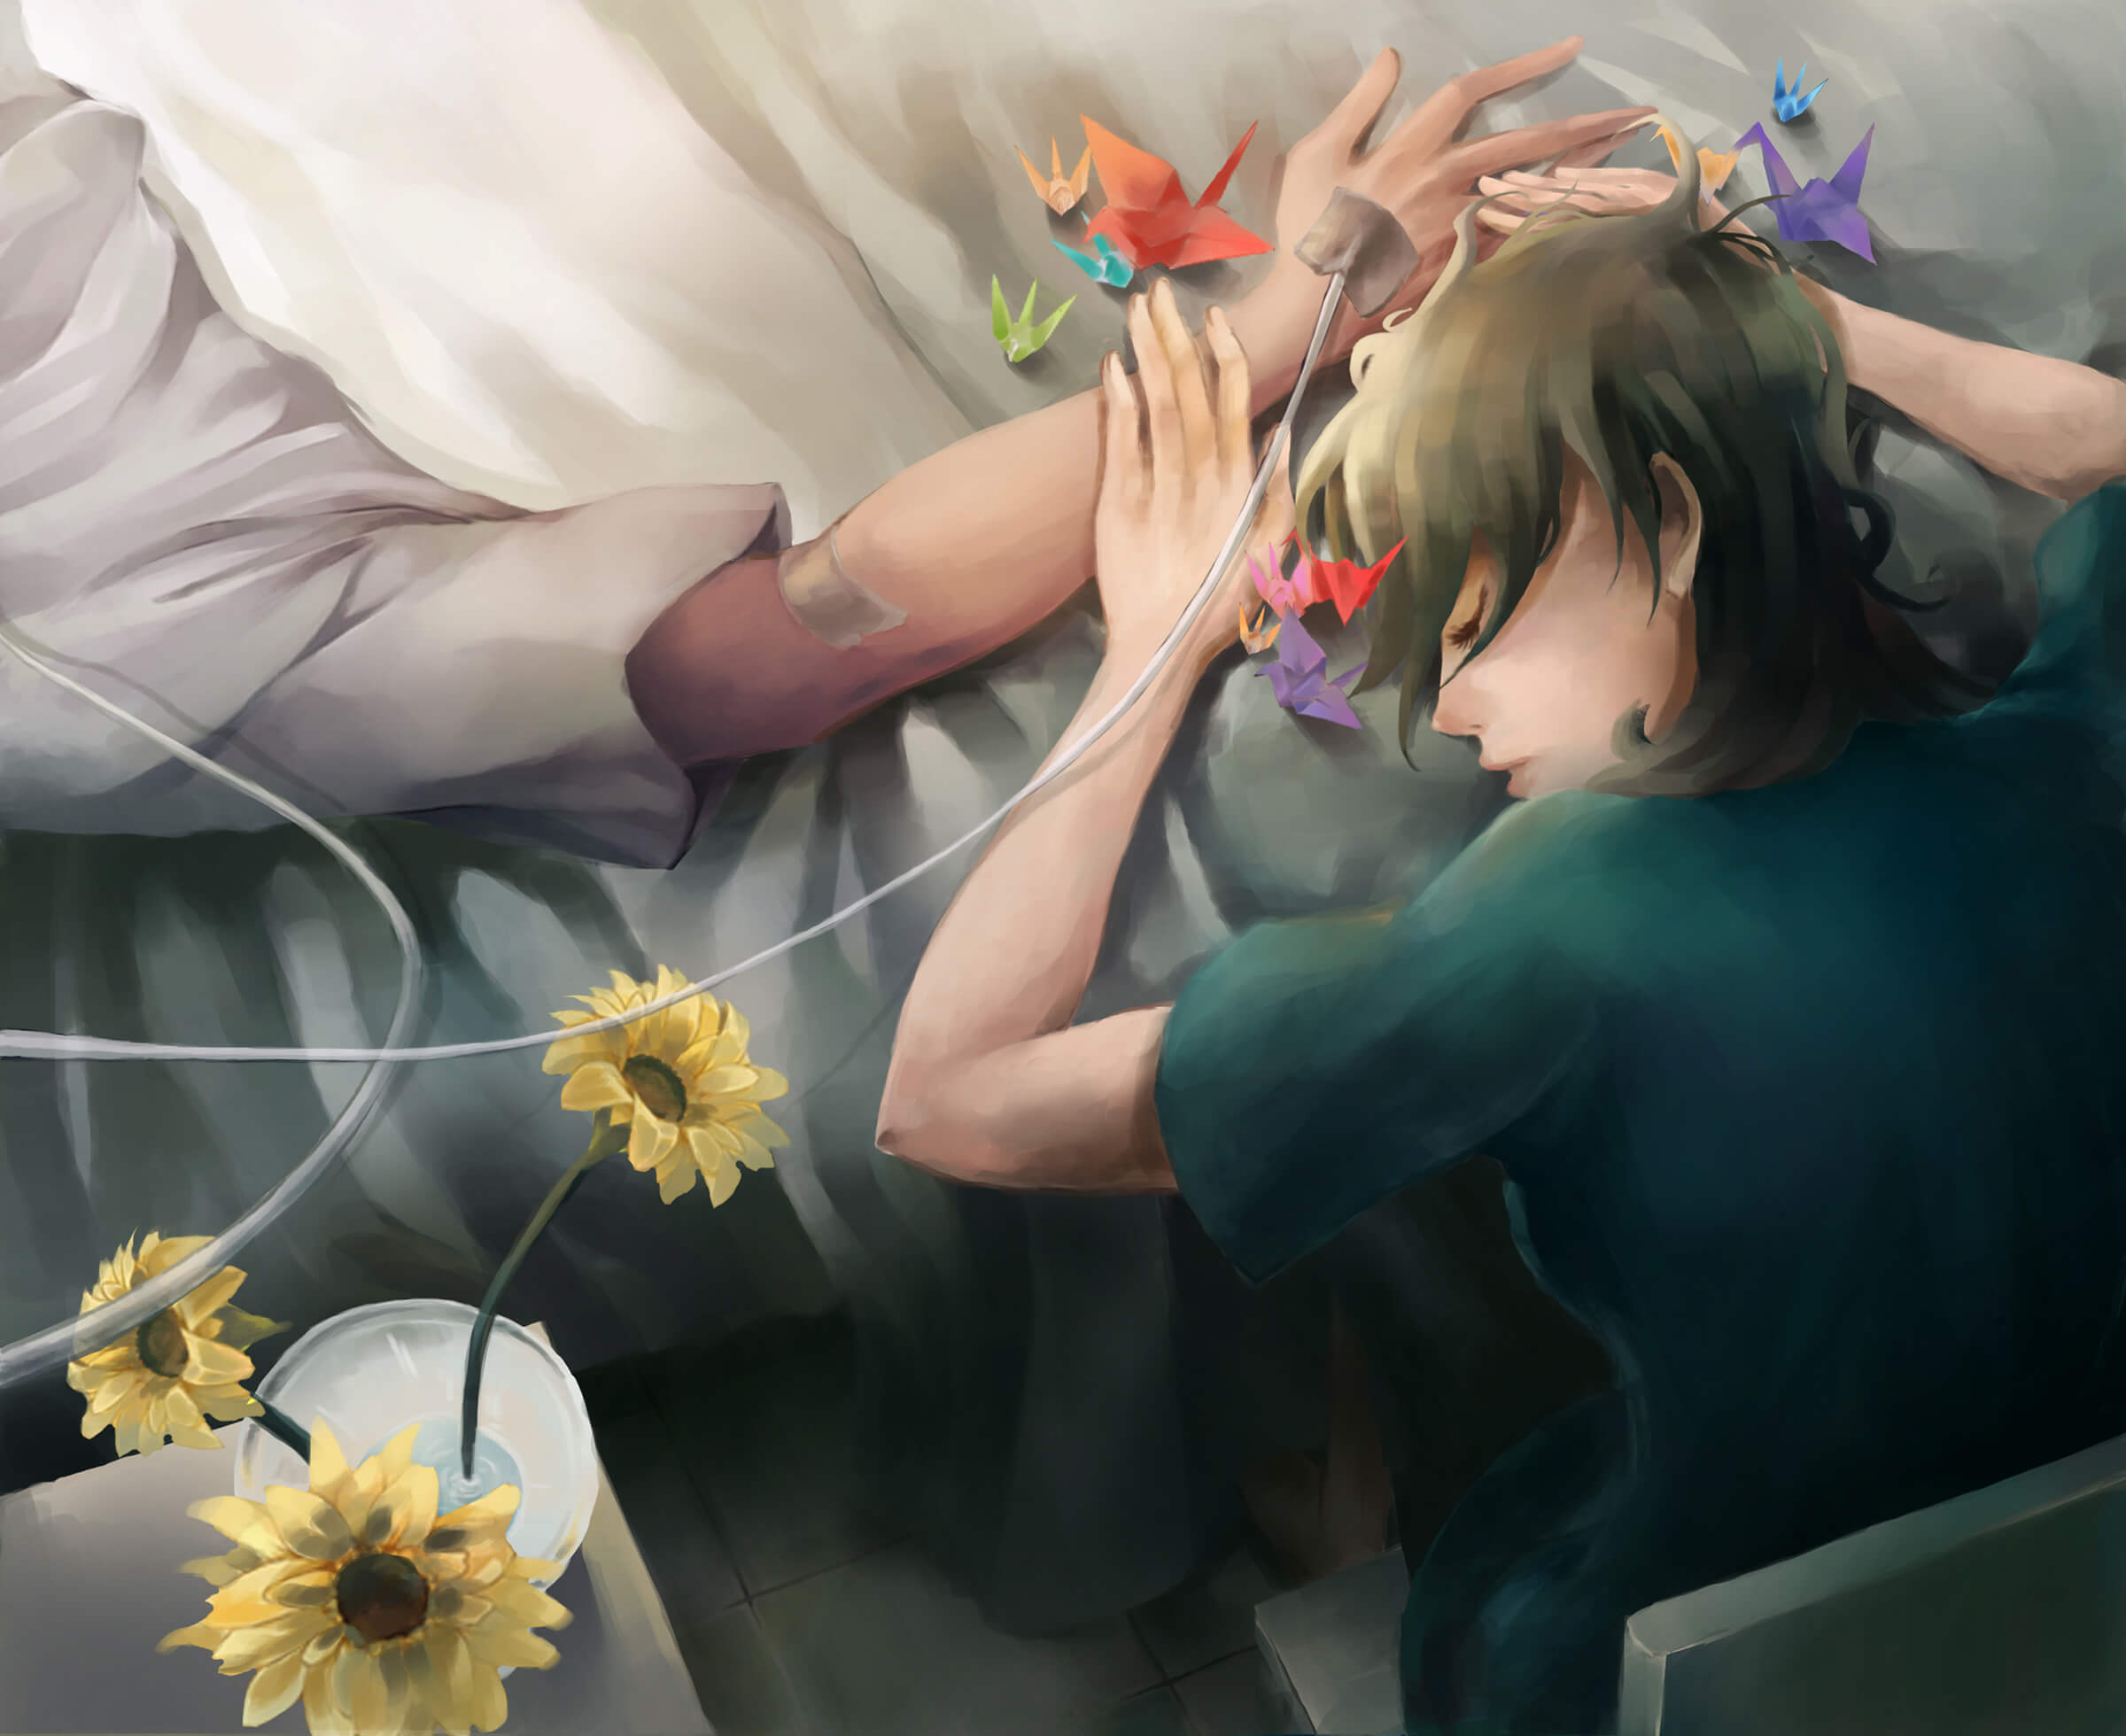 A girl rests her head against an arm of a person in a hospital bed, with several brightly colored paper cranes nearby.